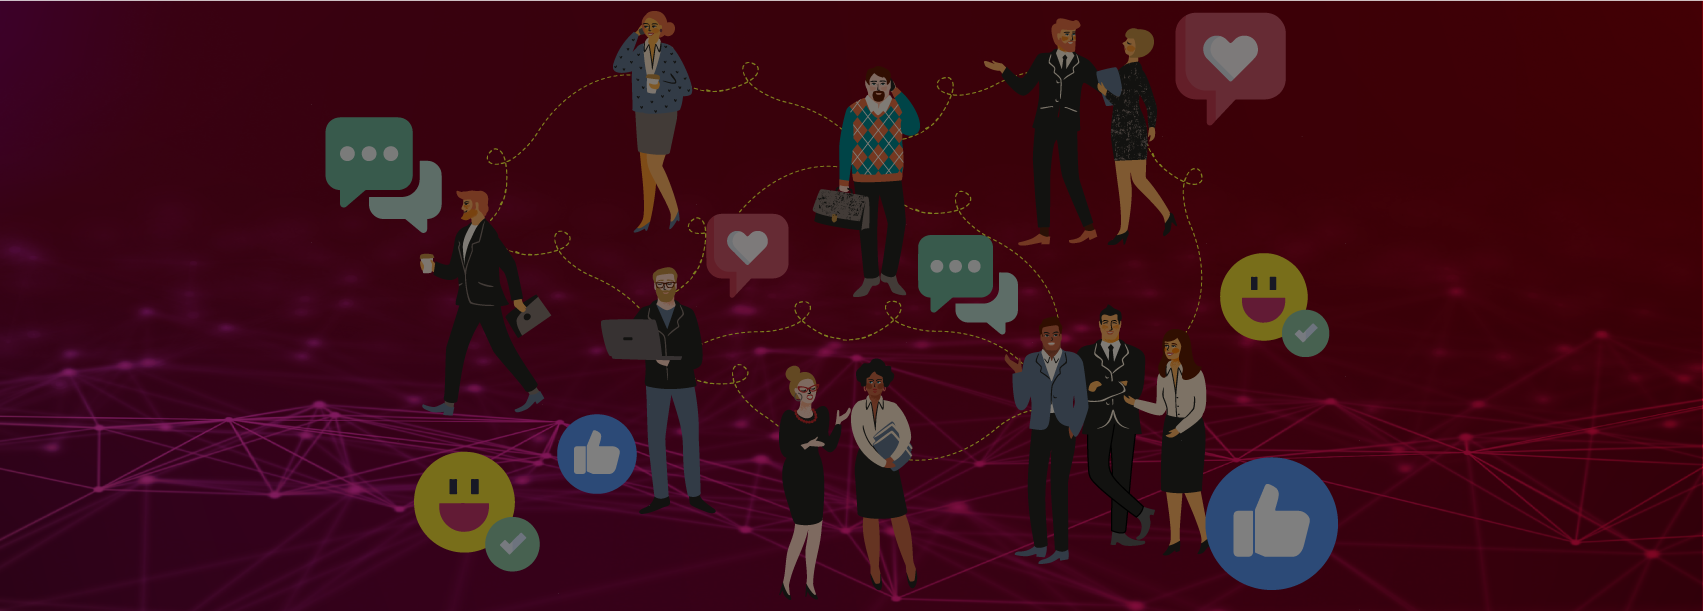 A graphic of a number of people engaging in different forms of communication, surround by social media-related icons